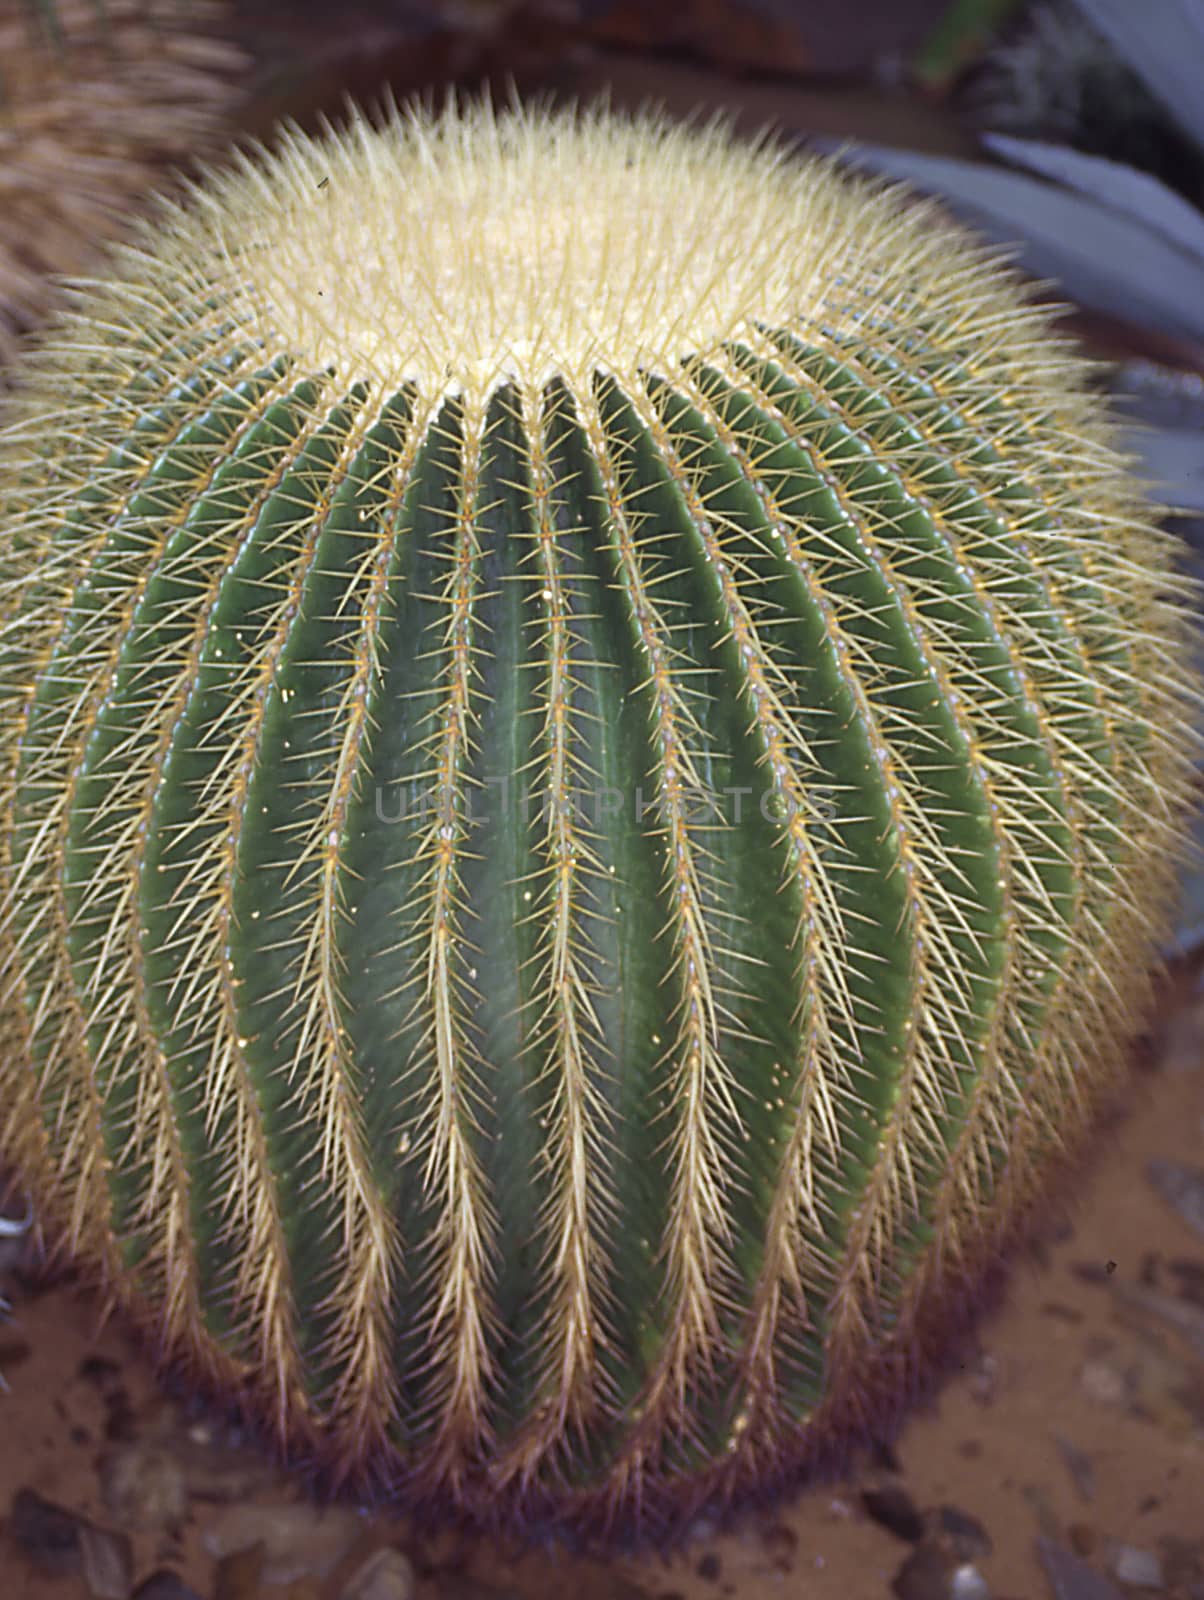 spherical cactus the mother-in-law seat by Dr-Lange